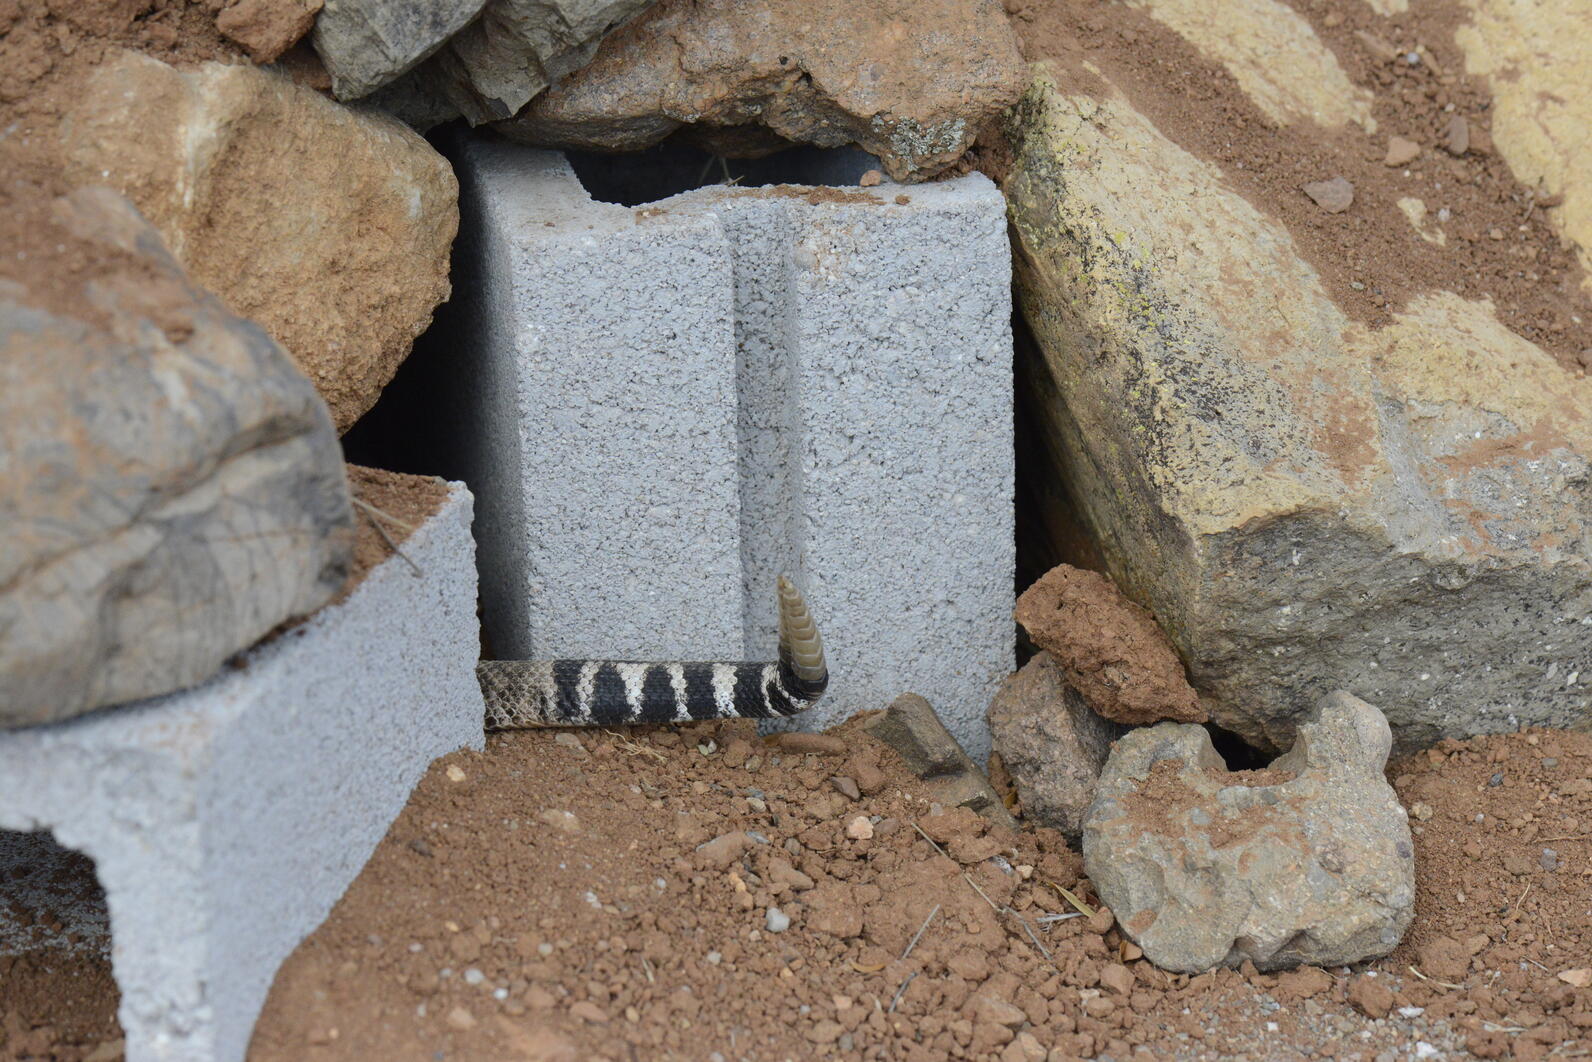 Only the rattle and black-and-white tail bands of a western diamondback rattlesnake are visible as it disappears into a dark hole behind a gray cinder block.